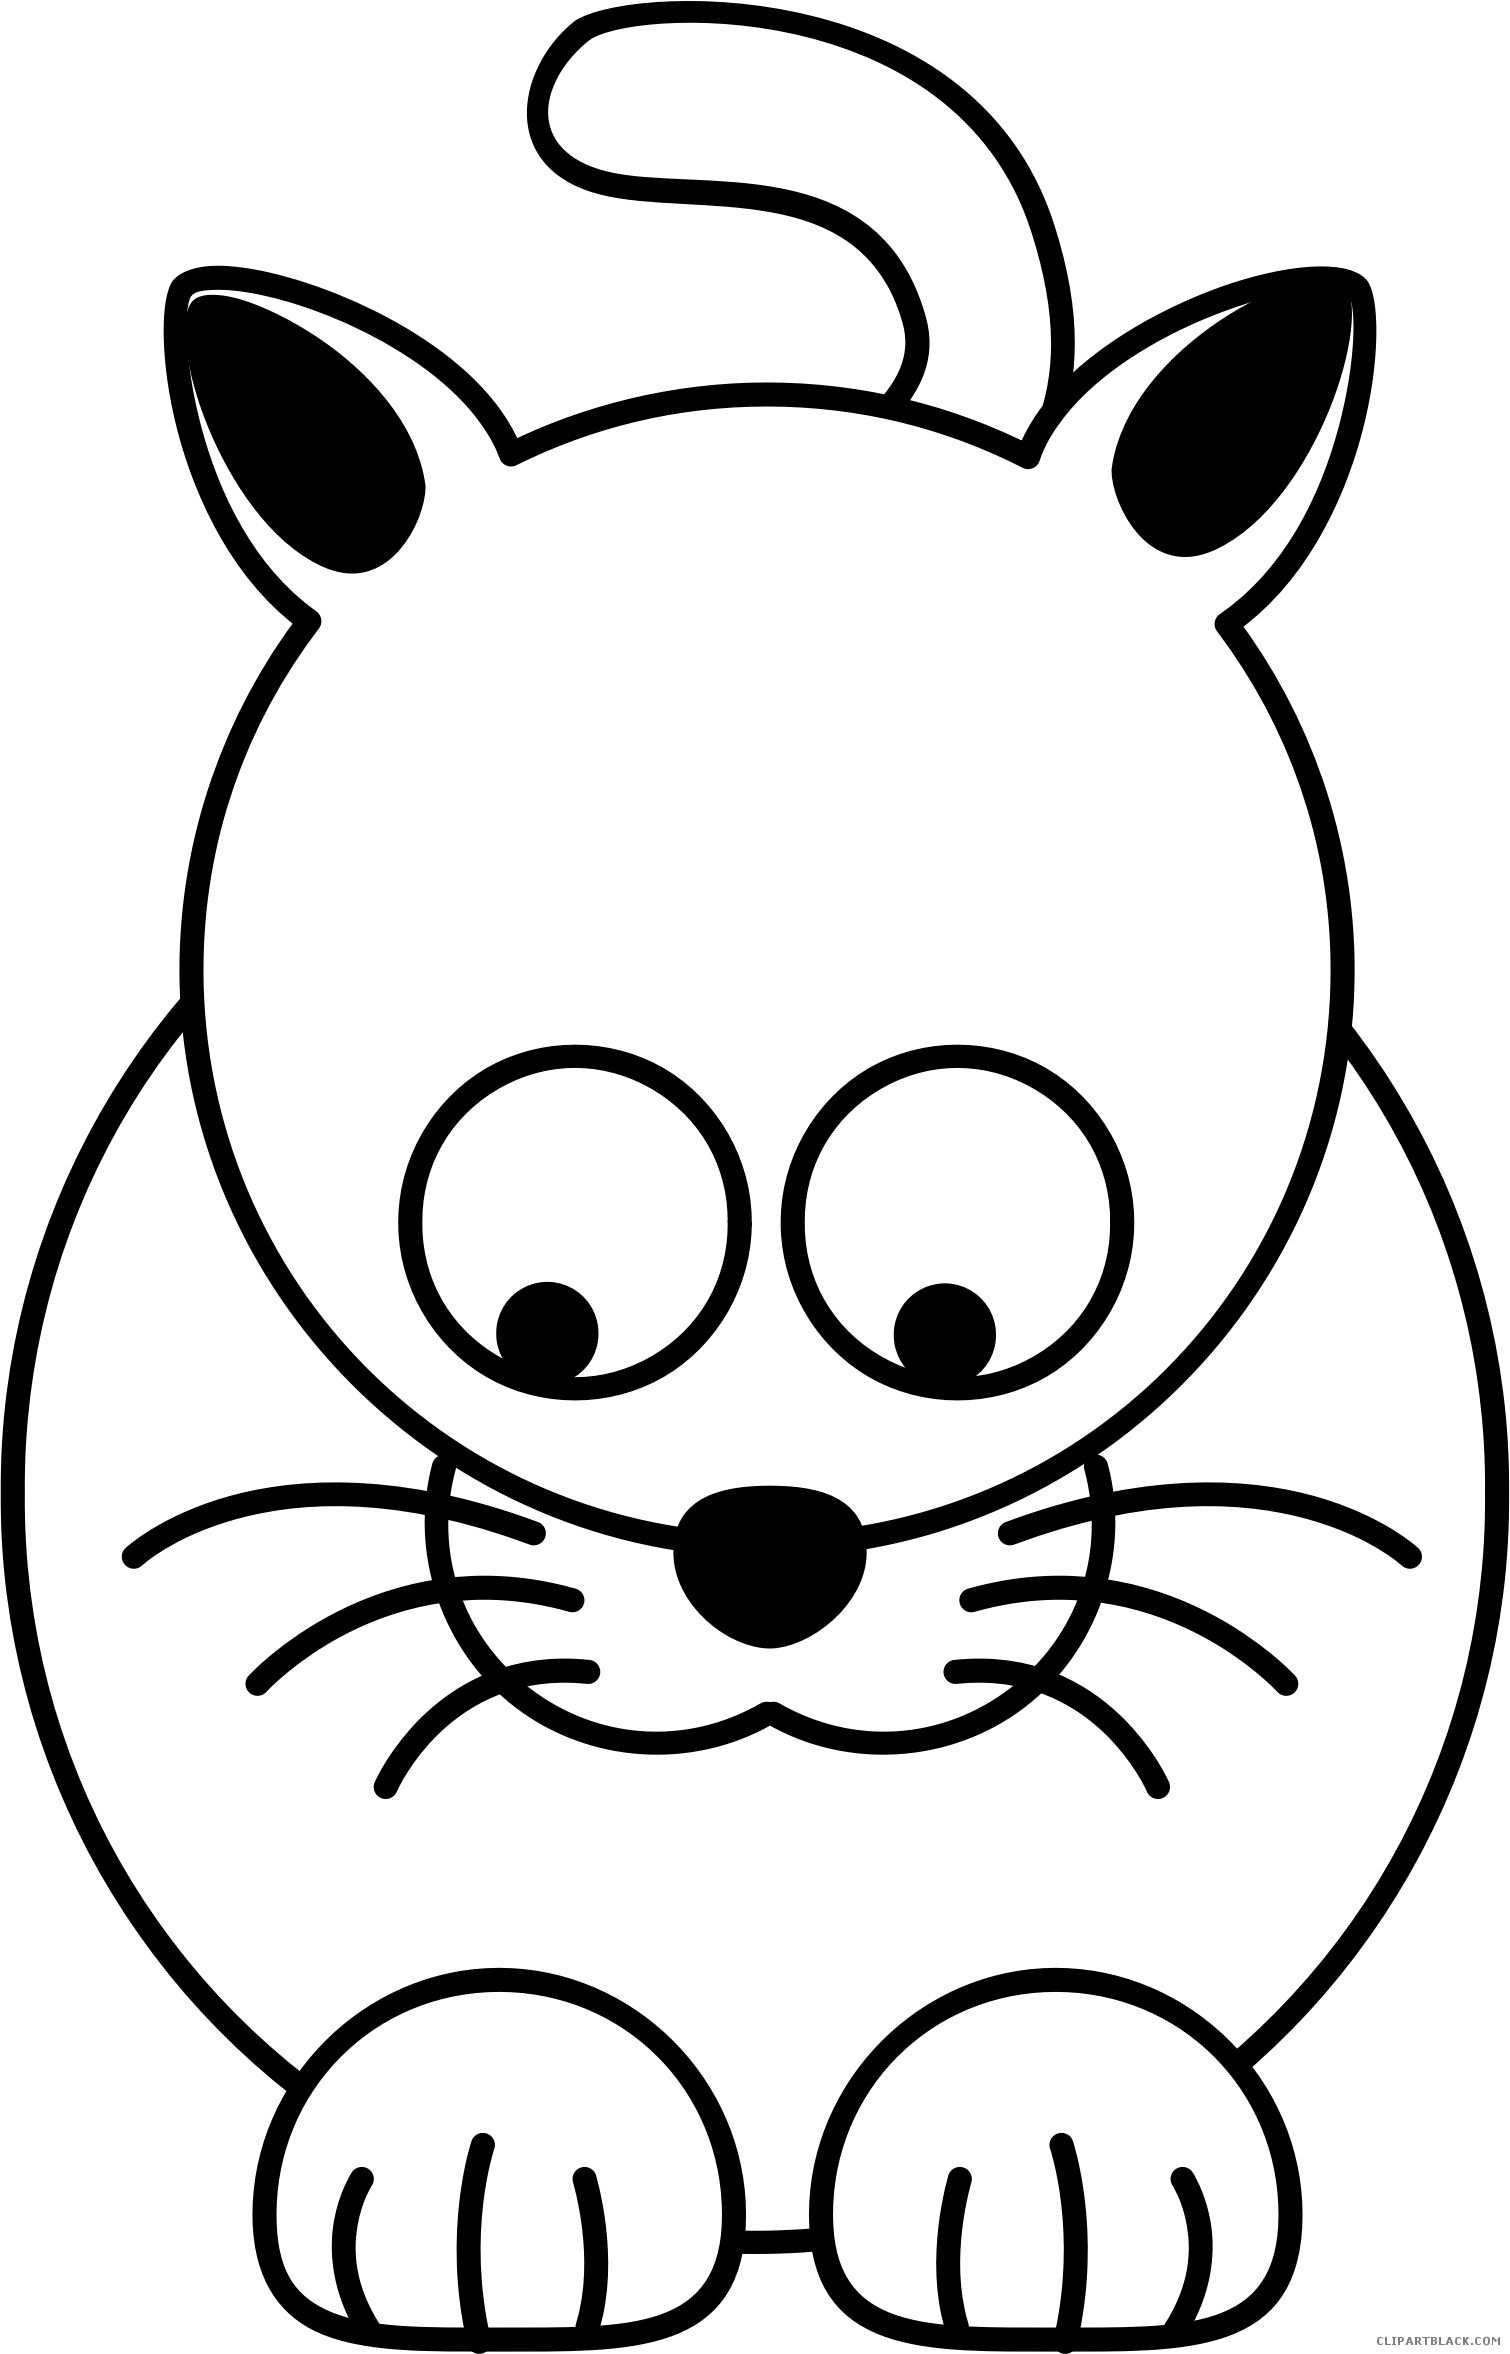 Kitty Cat Animal Free Black White Clipart Images Clipartblack - Black And White Cartoon Cats (1510x2354)